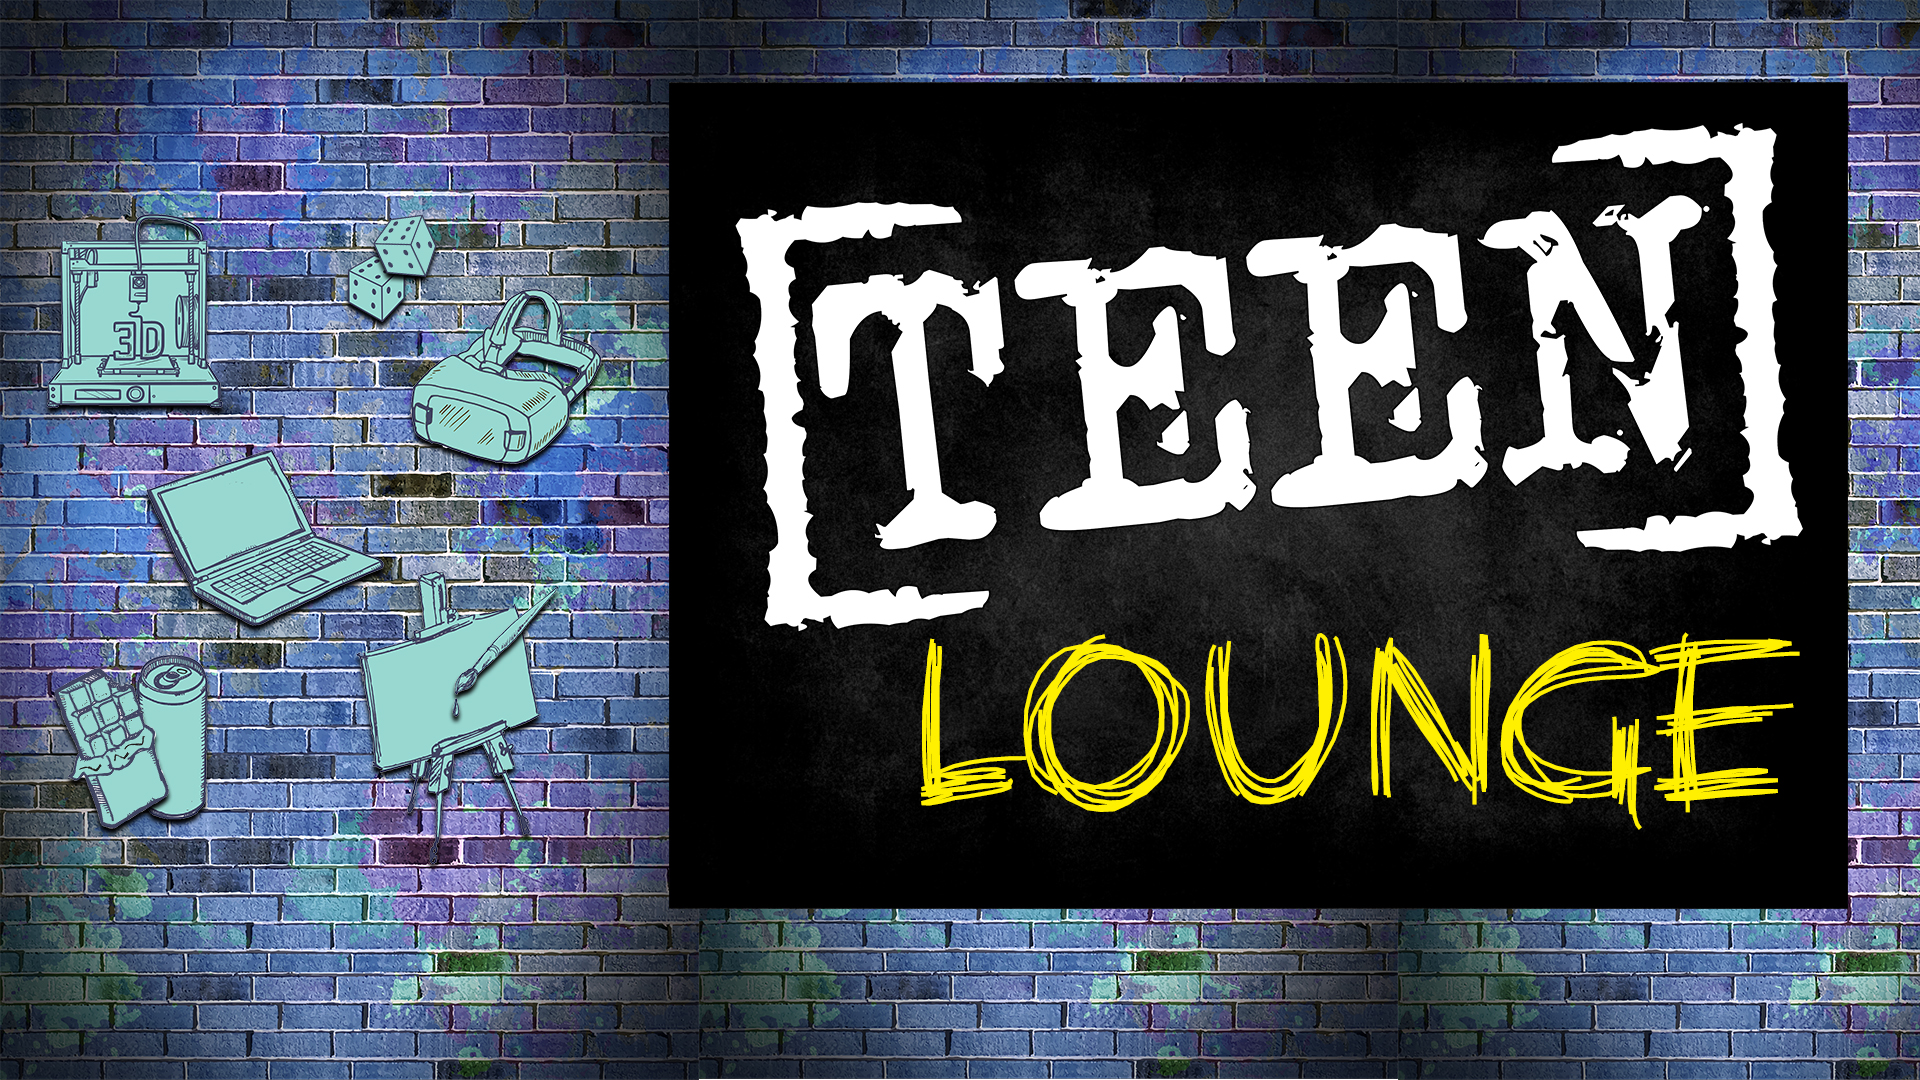 Image reads "Teen Lounge" on a blue brick background. Graphics of a computer, a 3D printer, dice, snacks, VR headset, and art easel are to the left of the title.